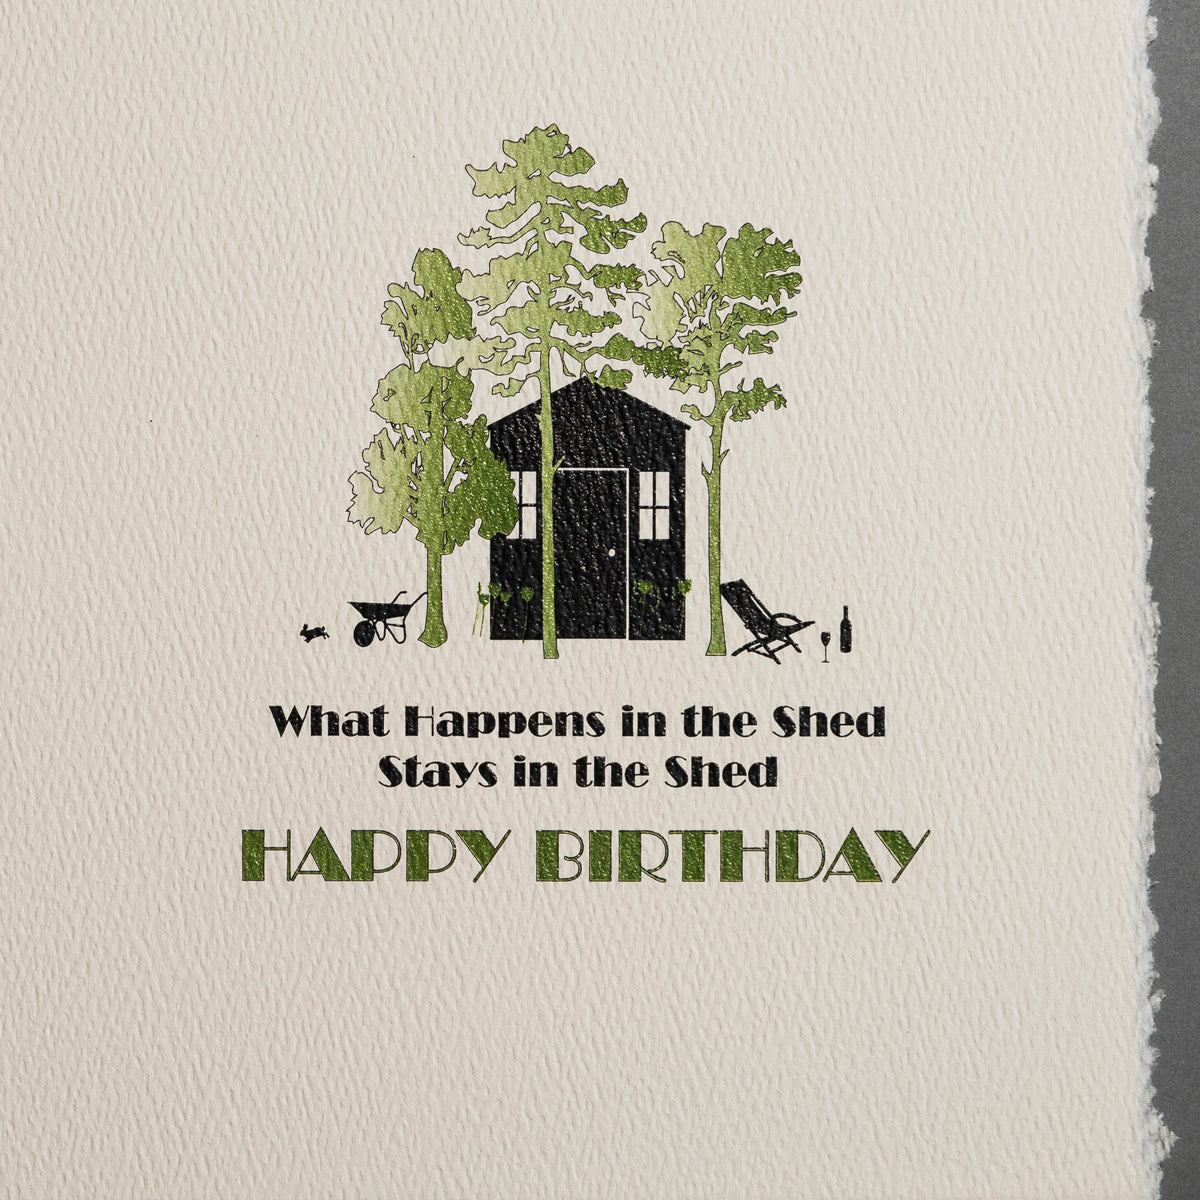 Five Dollar Shake What Happens in the Shed Birthday Card